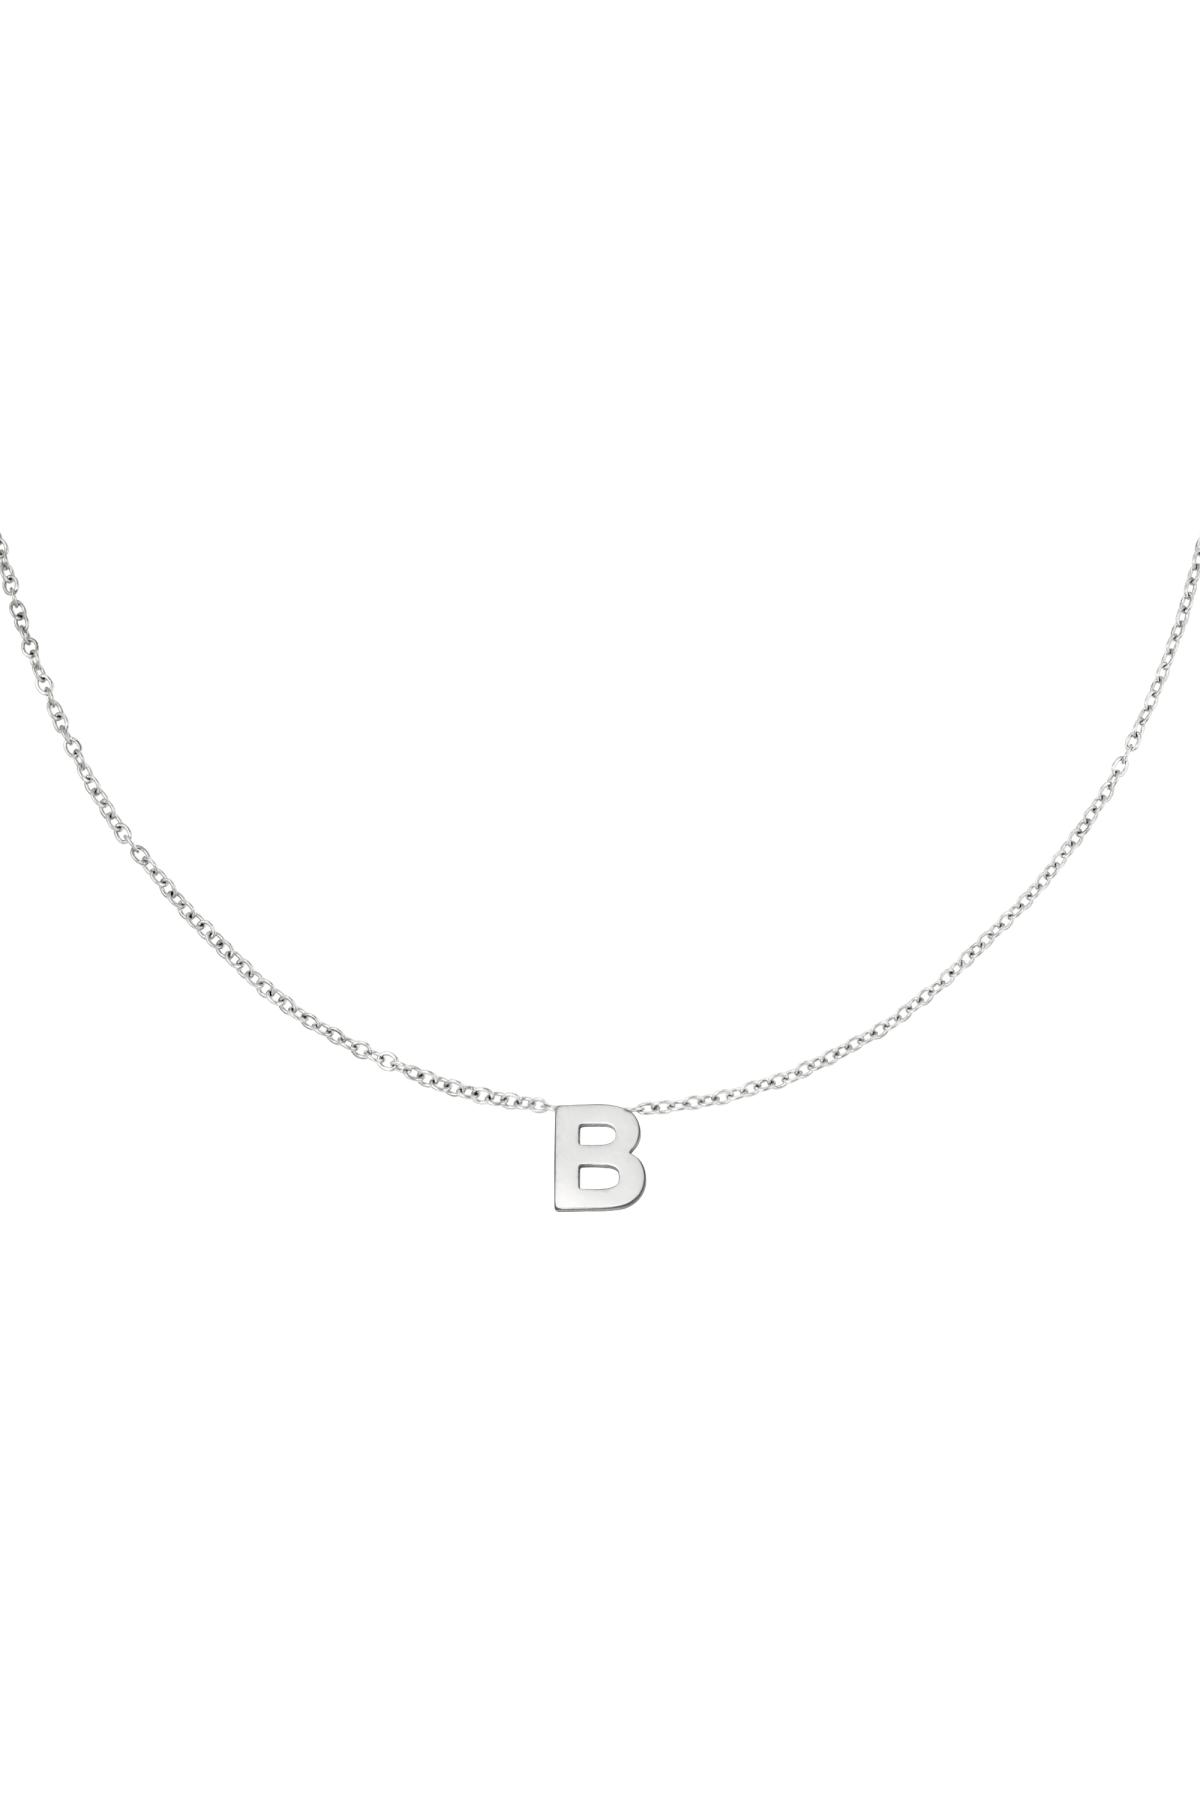 Silver / Stainless steel necklace initial B Silver Picture2